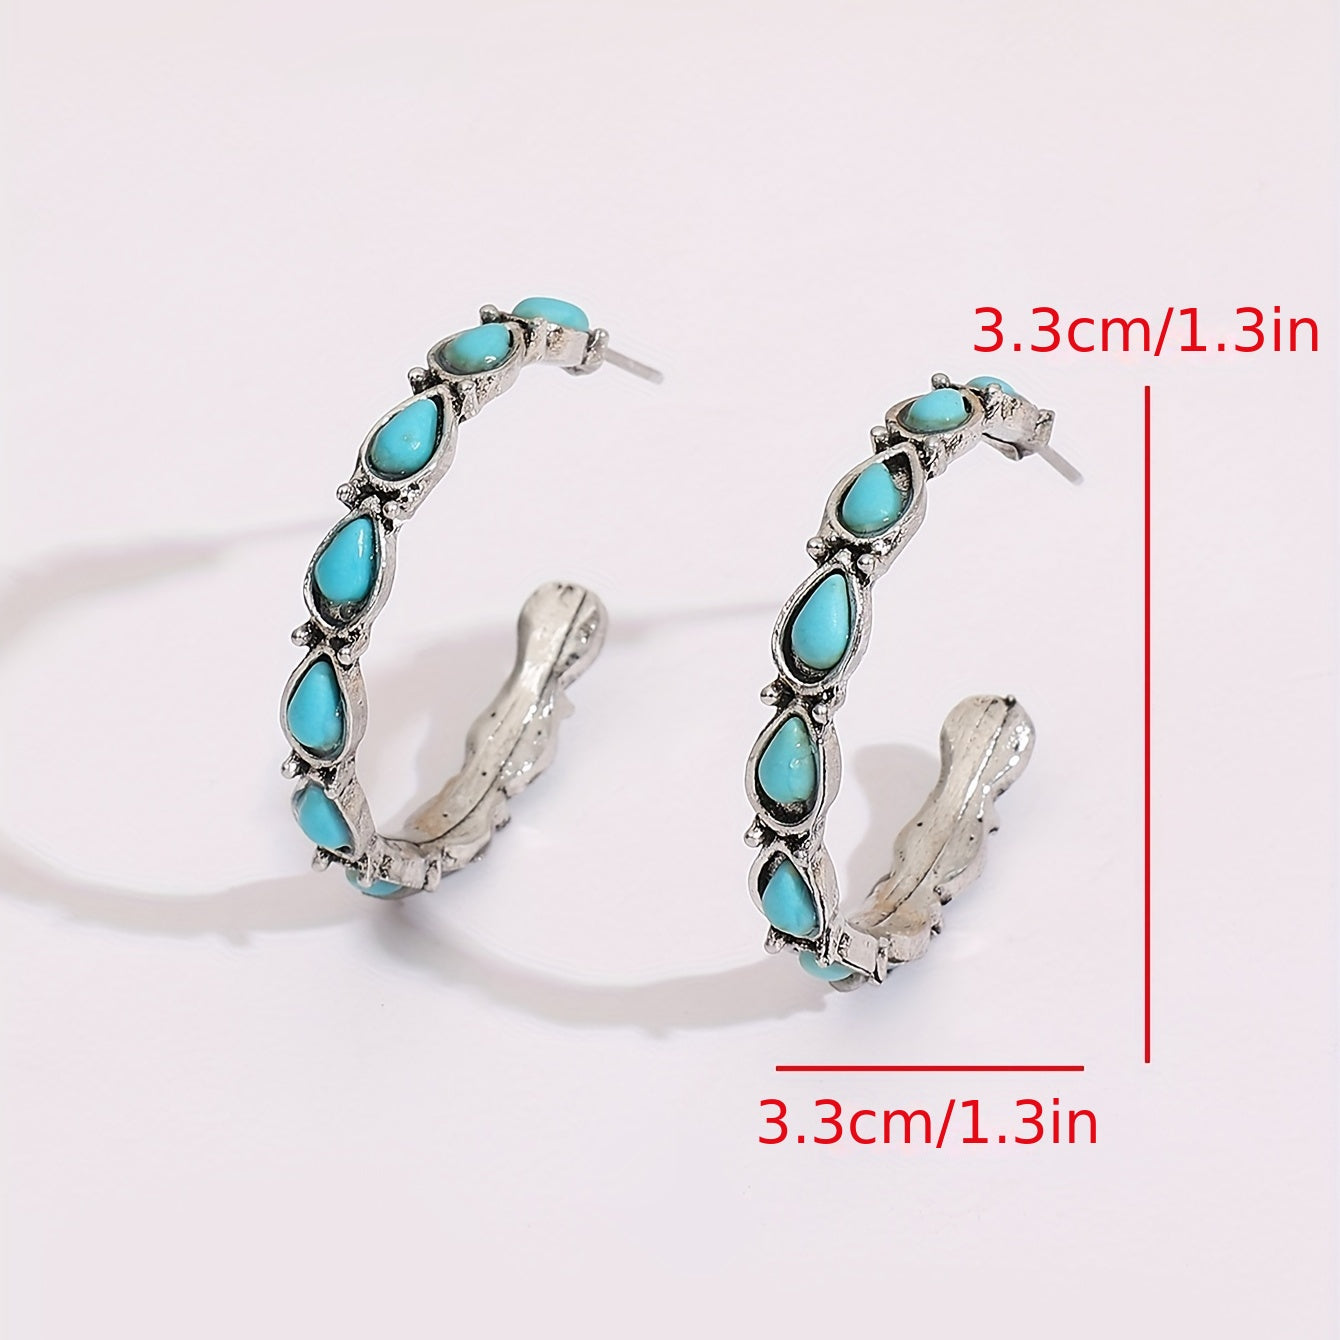 C Shape With Turquoise Decor Retro Elegant Hoop Earrings Western Style Zinc Alloy Silver Plated Jewelry Trendy Female Gift